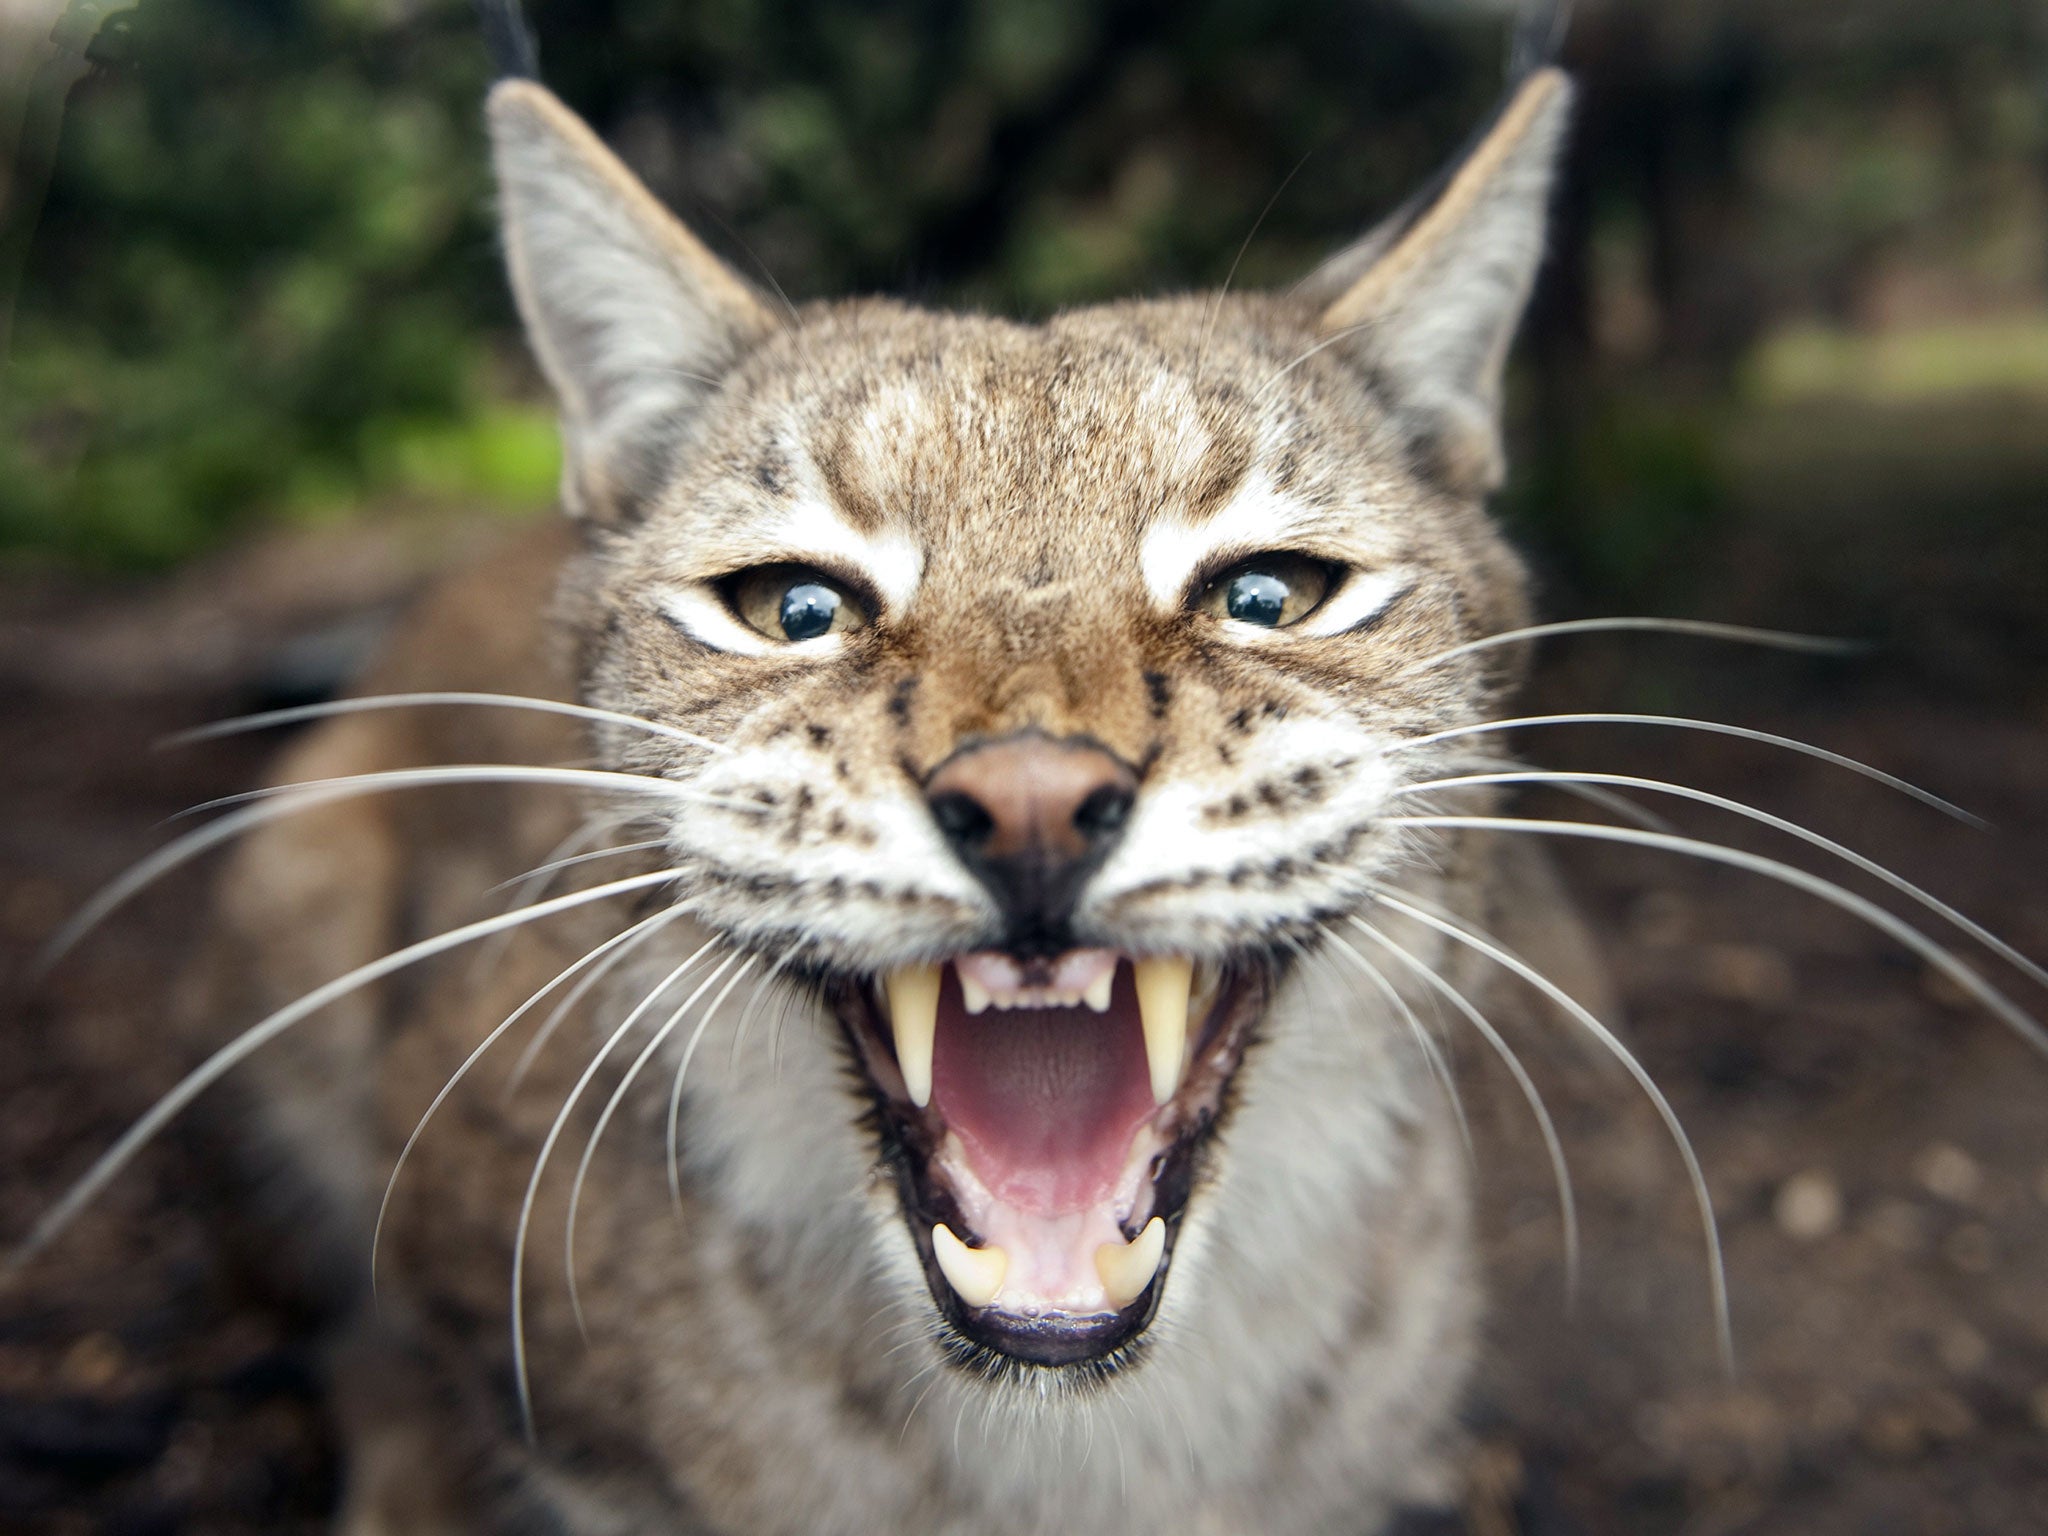 Lynx are to be reintroduced into the wild in Britain after a 1,300-year absence, under an ambitious 'rewilding' plan drawn up by a conservation charity